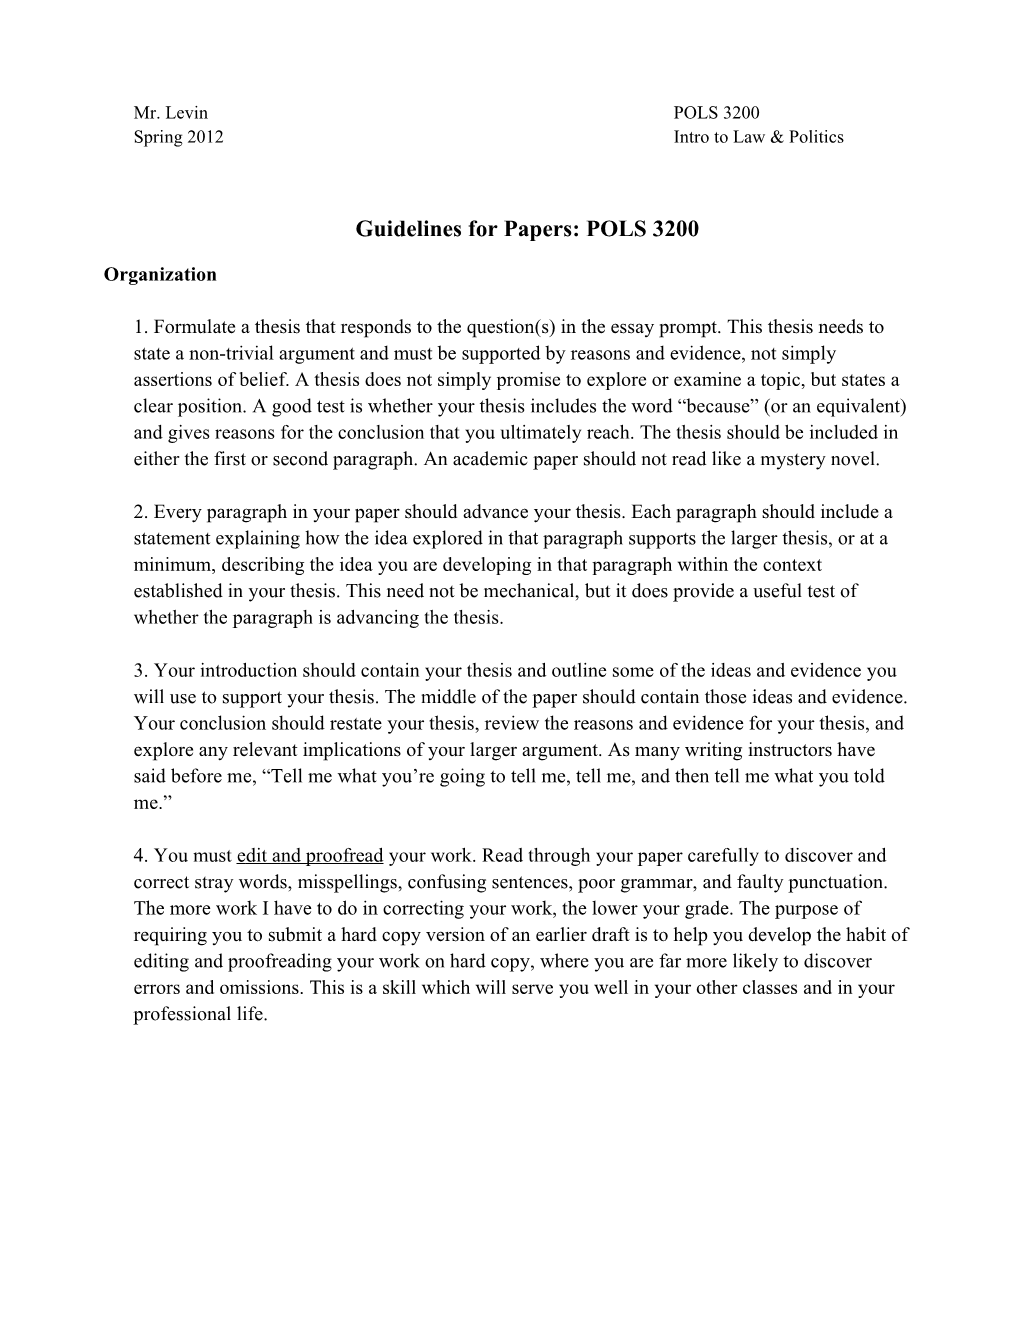 Guidelinesfor Papers: POLS3200